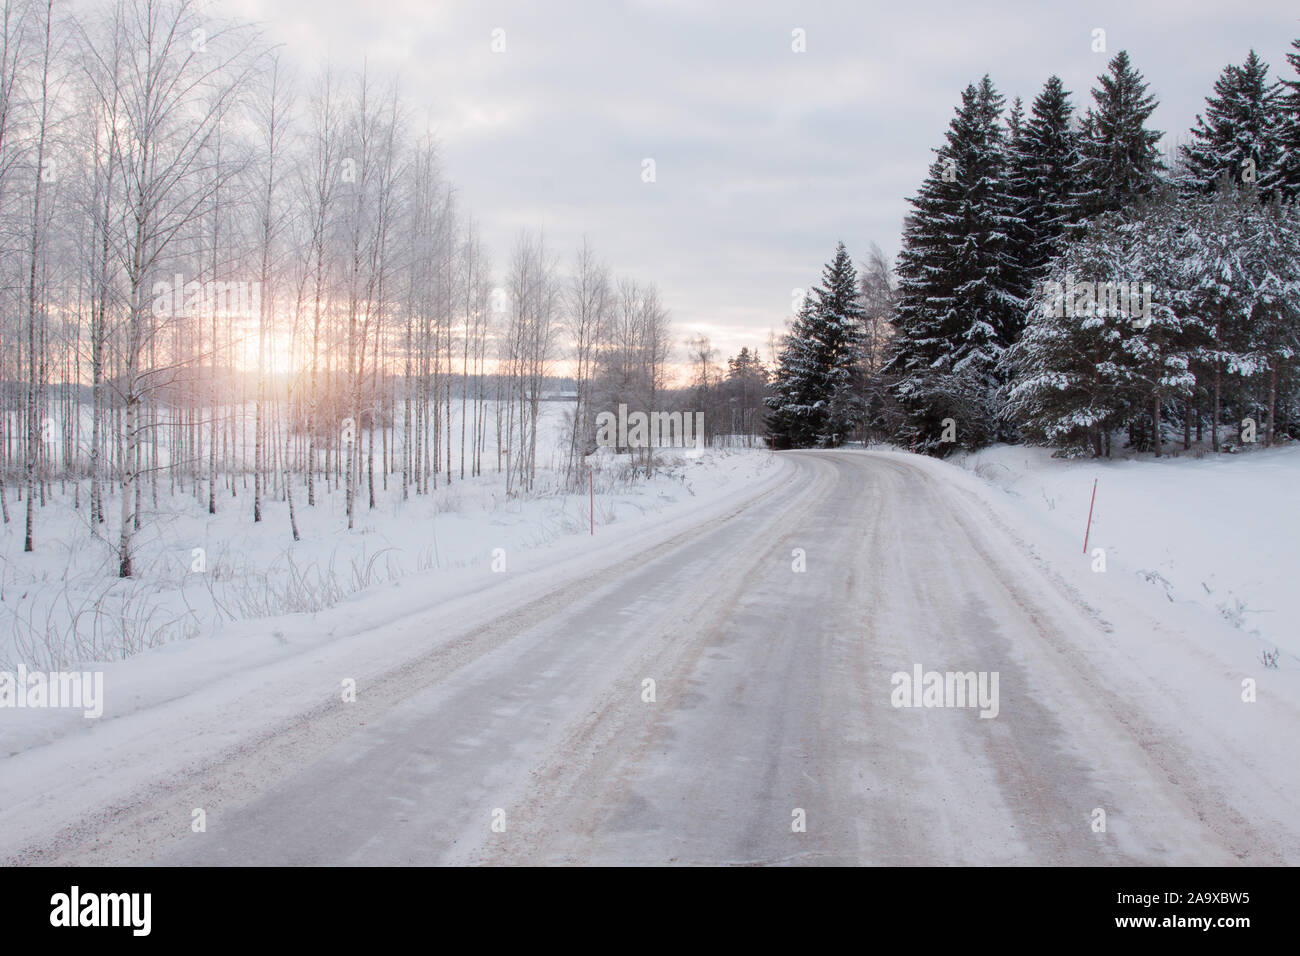 Winter landscape with frost and snow on the trees. The snow lies deep beside the ploughed road. Salo, Finland. Stock Photo